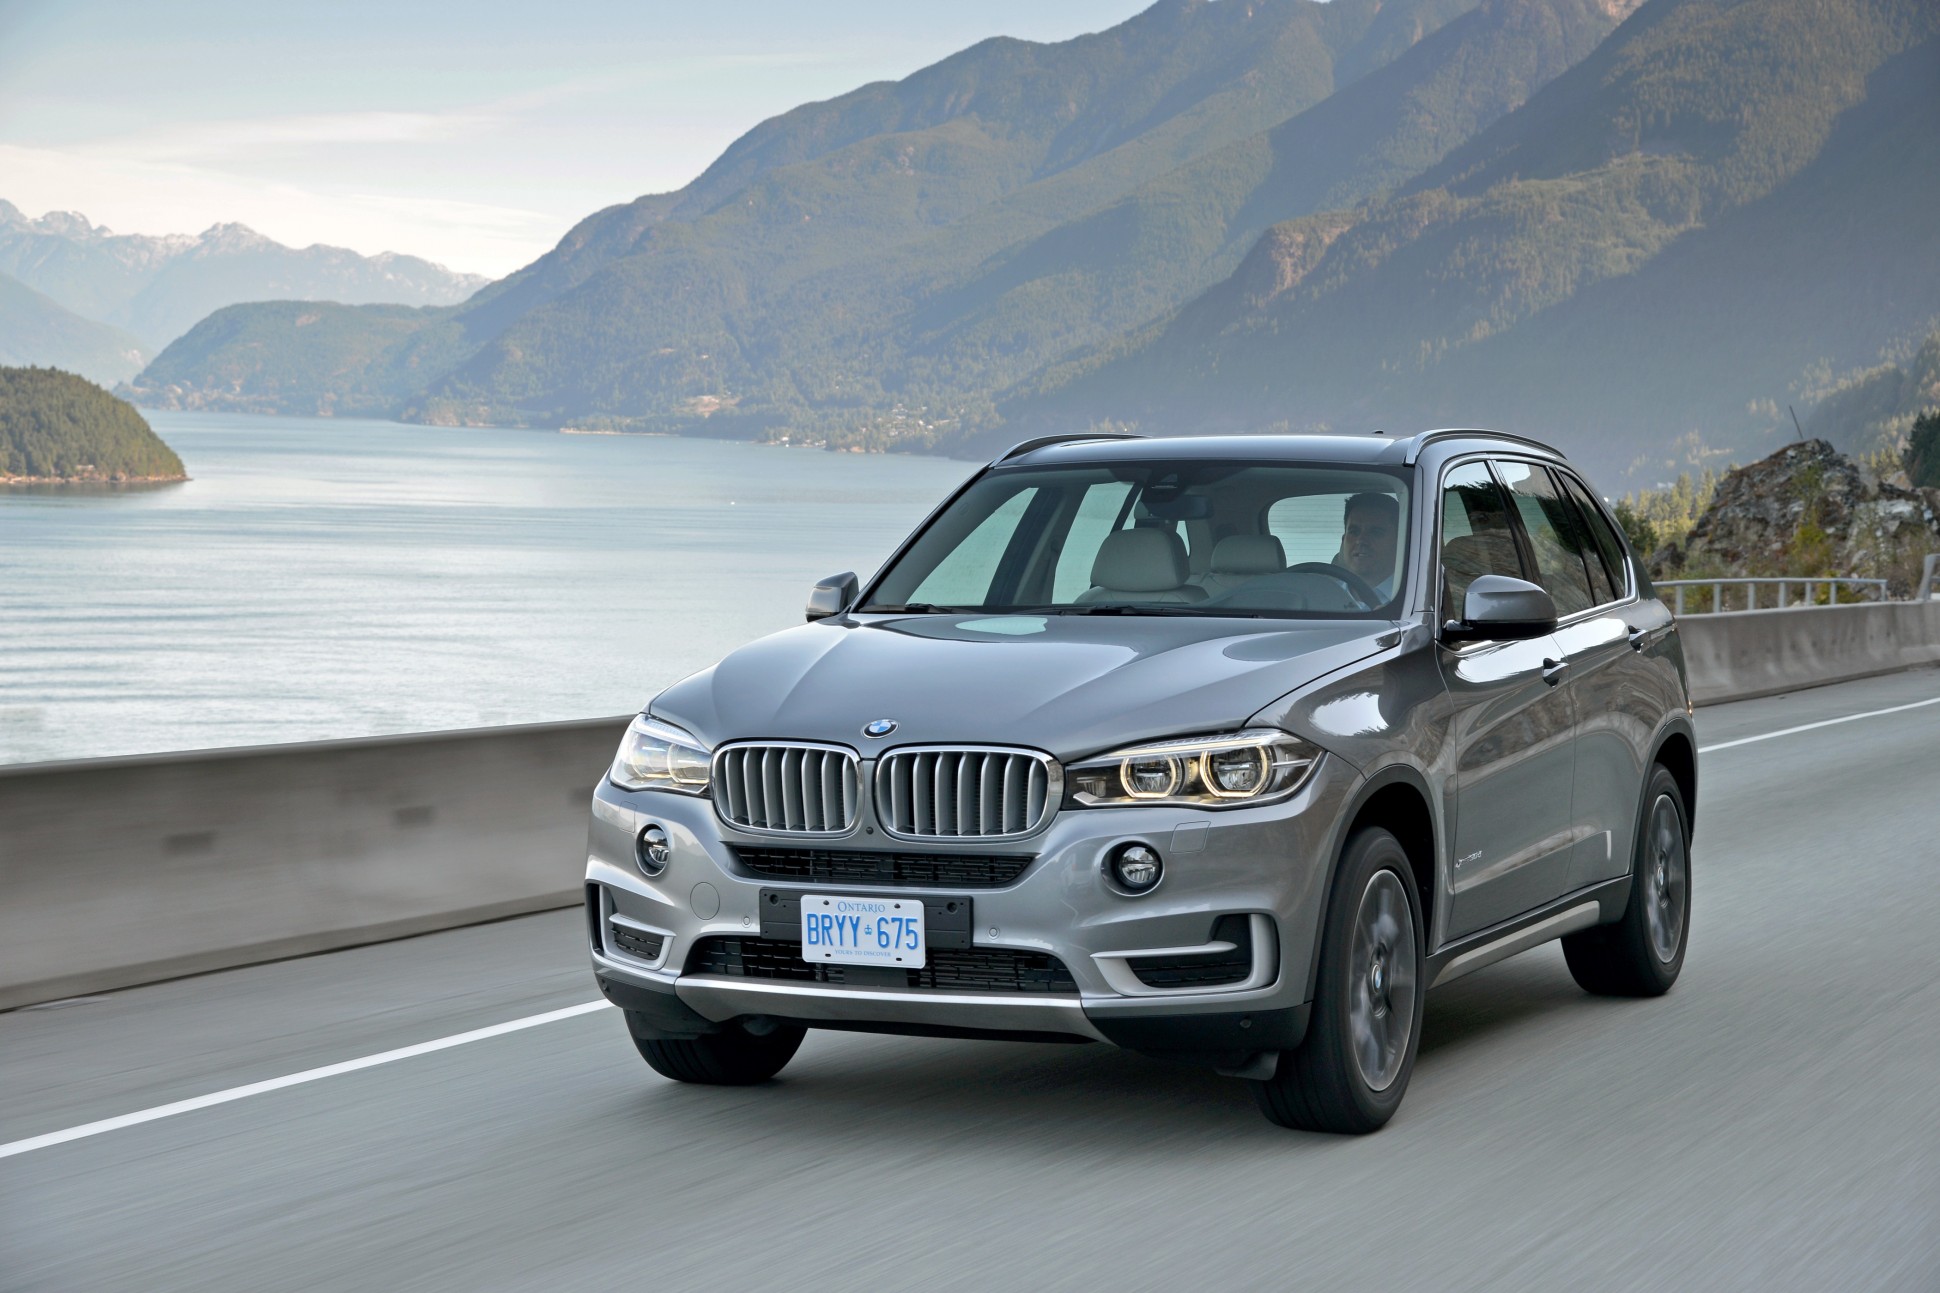 China Parallel Import Would See BMW X5 Price Slashed Up To 30 Per Cent